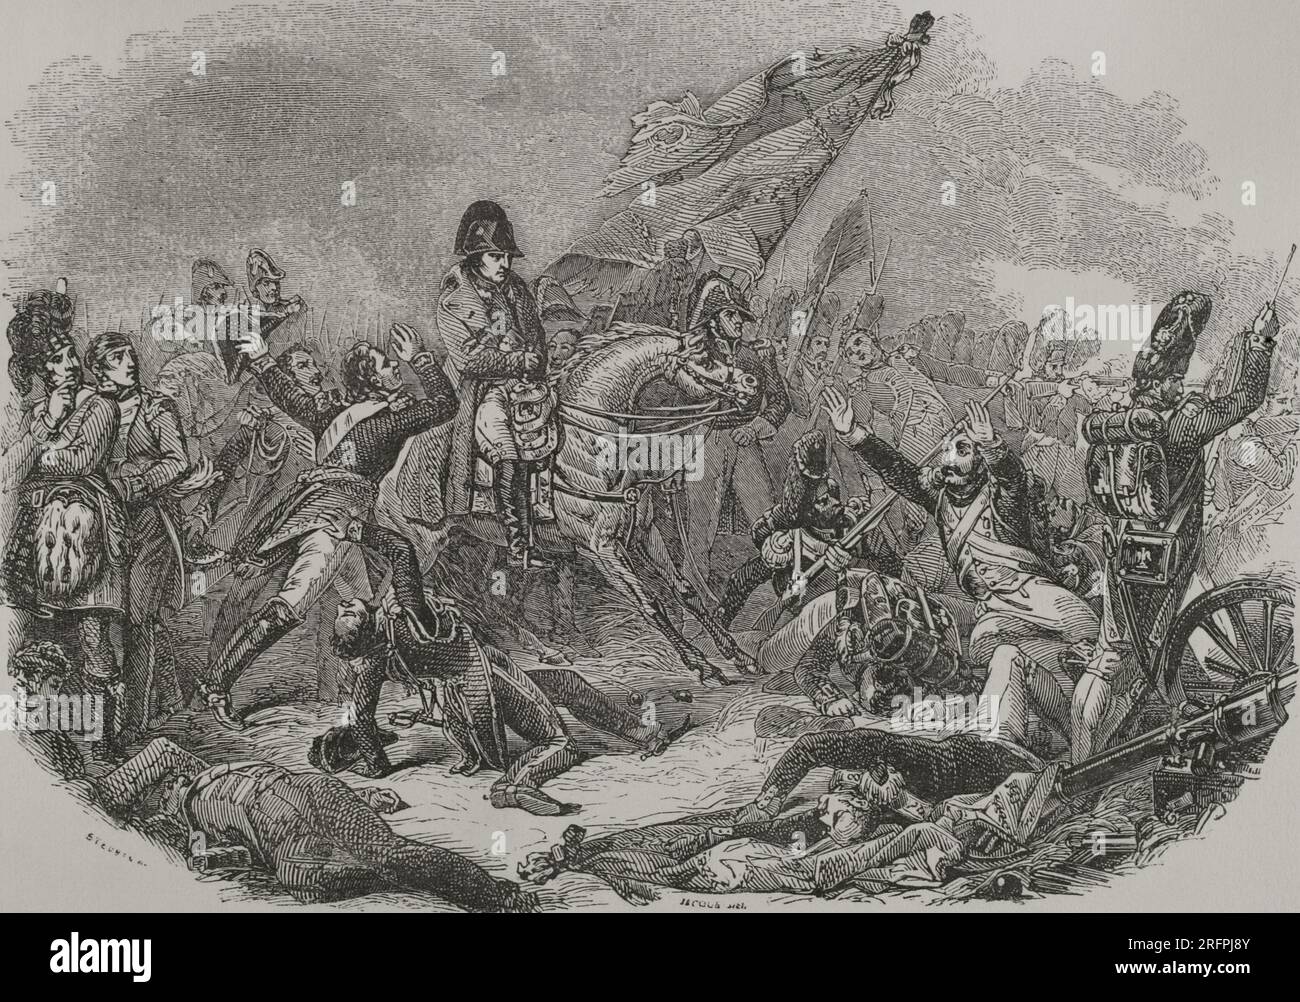 Napoleonic Wars. Battle of Waterloo. Combat that took place on 18 June 1815 in present-day Belgium. Napoleon was defeated by two of the armies of the Seventh Coalition. Engraving. 'Los Héroes y las Grandezas de la Tierra'.  Volume V. 1855. Stock Photo